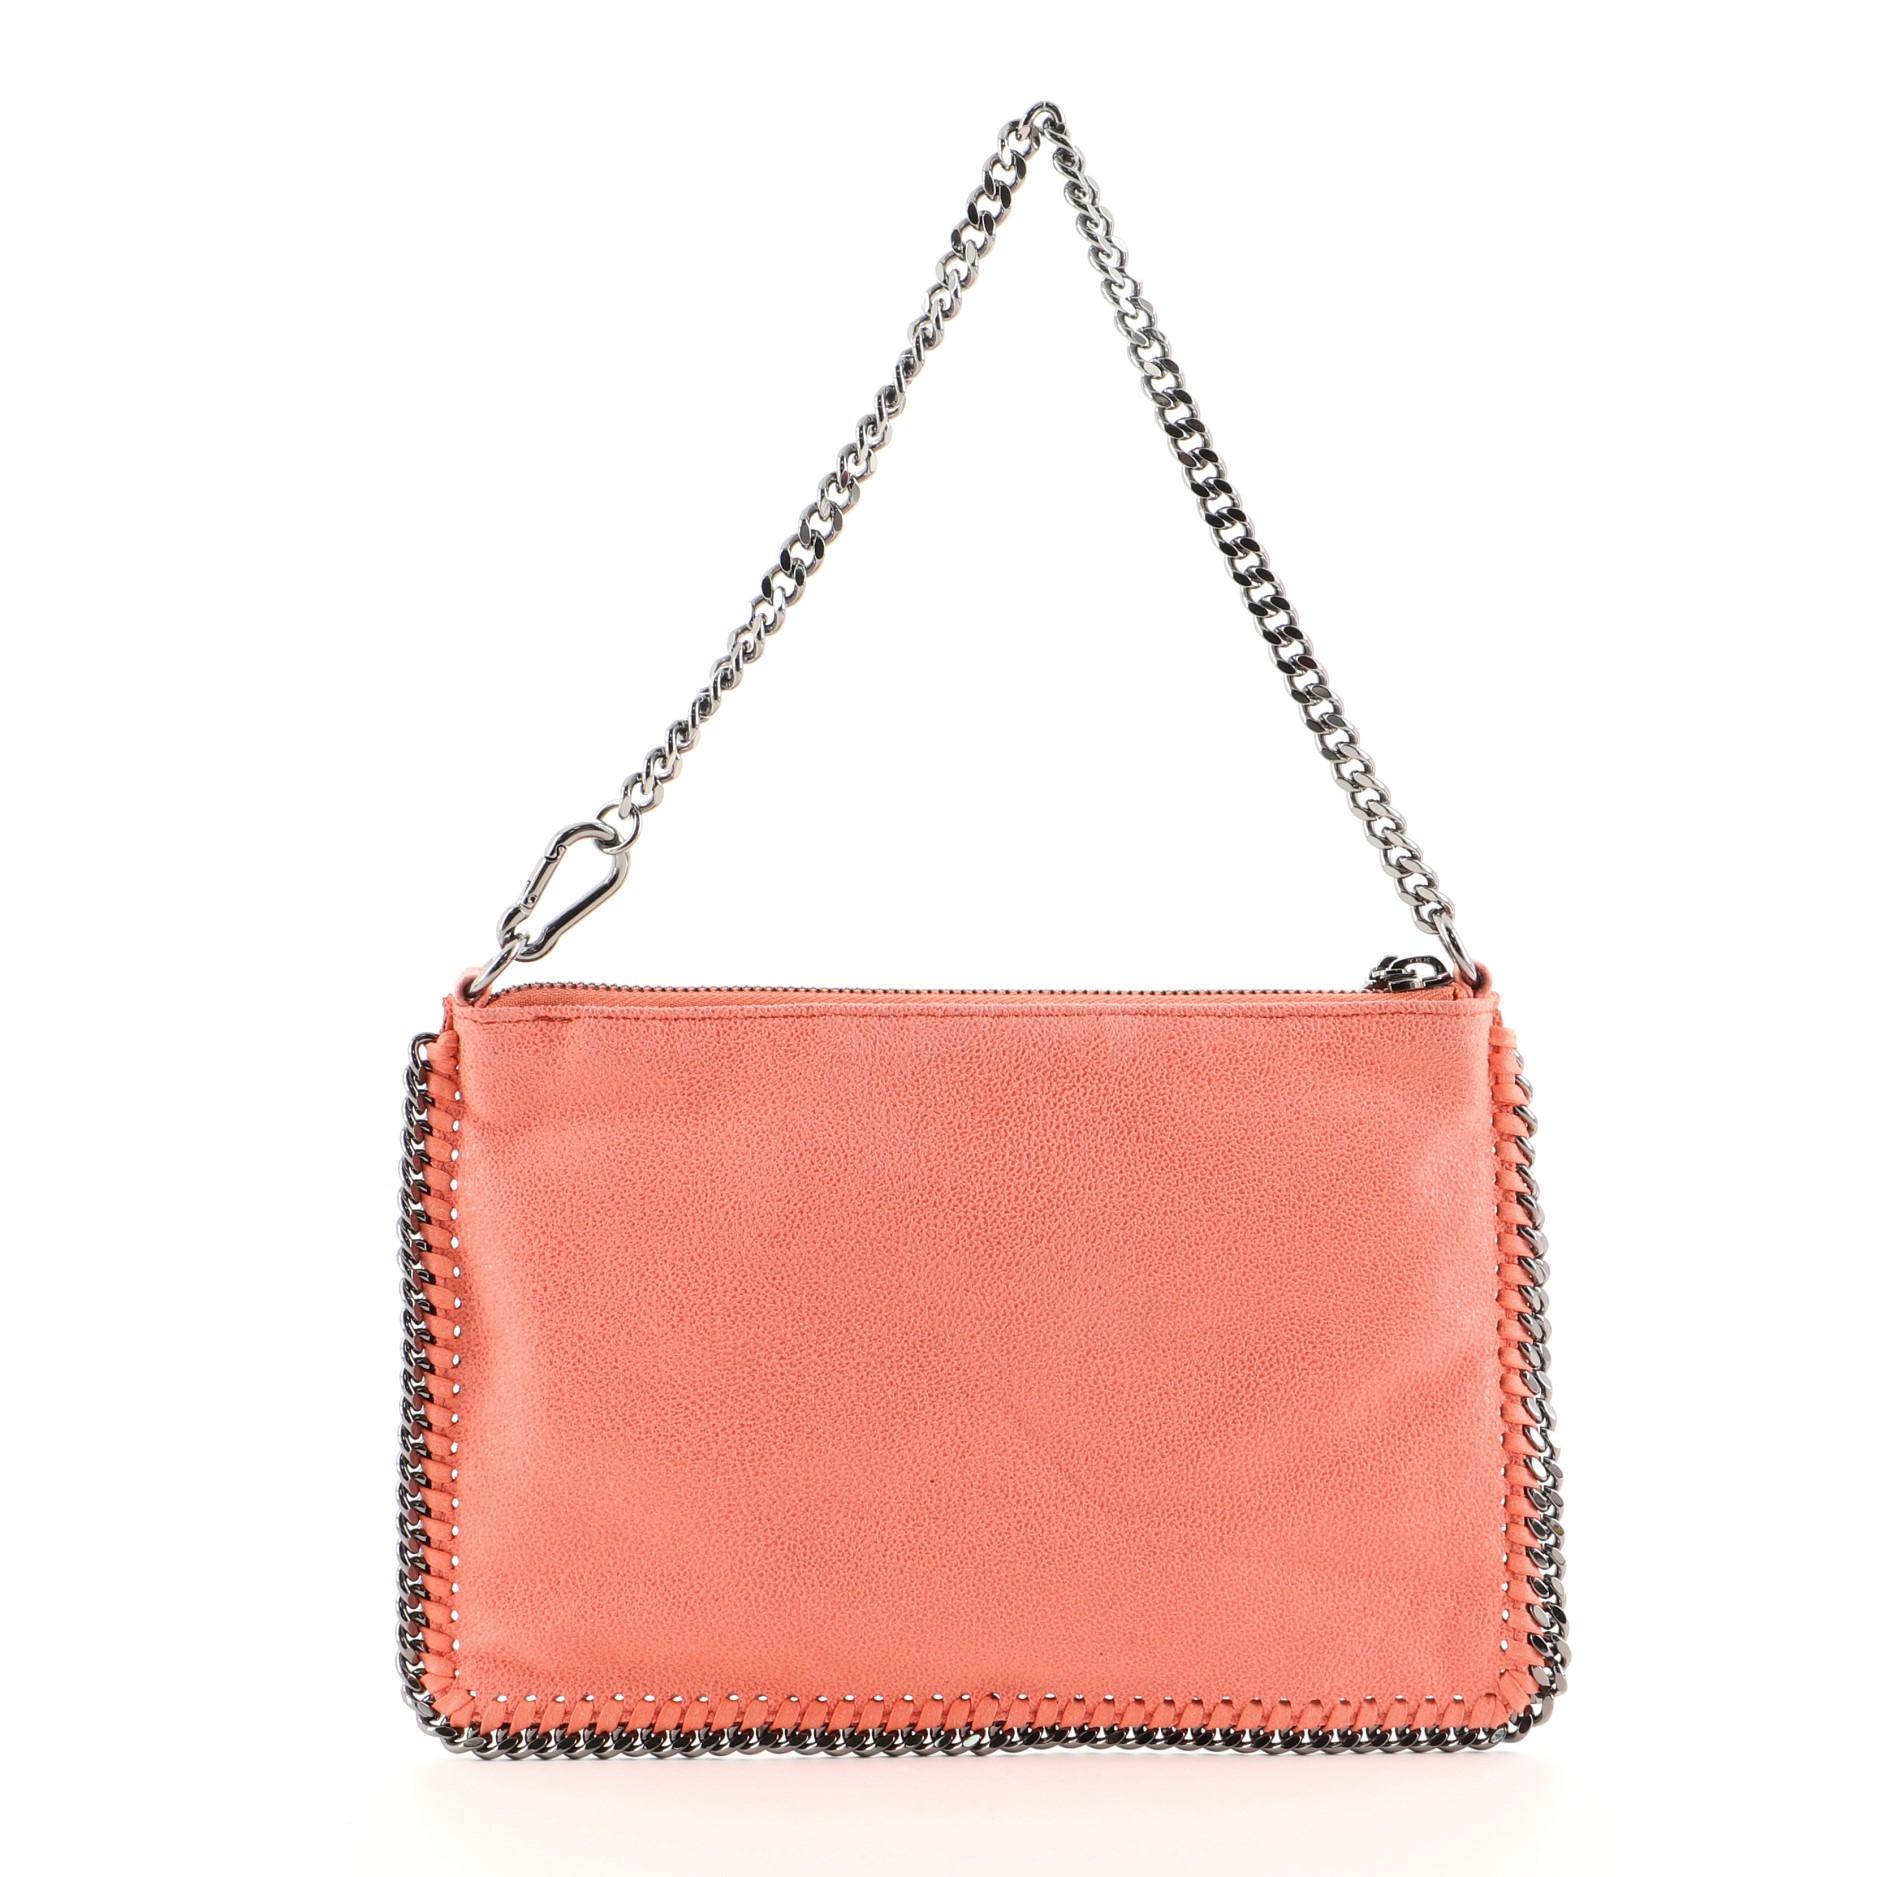 Stella McCartney Falabella Pochette Shaggy Deer
Orange

Condition Details: Moderate wear on base and opening trims, small glue stain on front opening corner, scratches on hardware.

52311MSC

Height 5